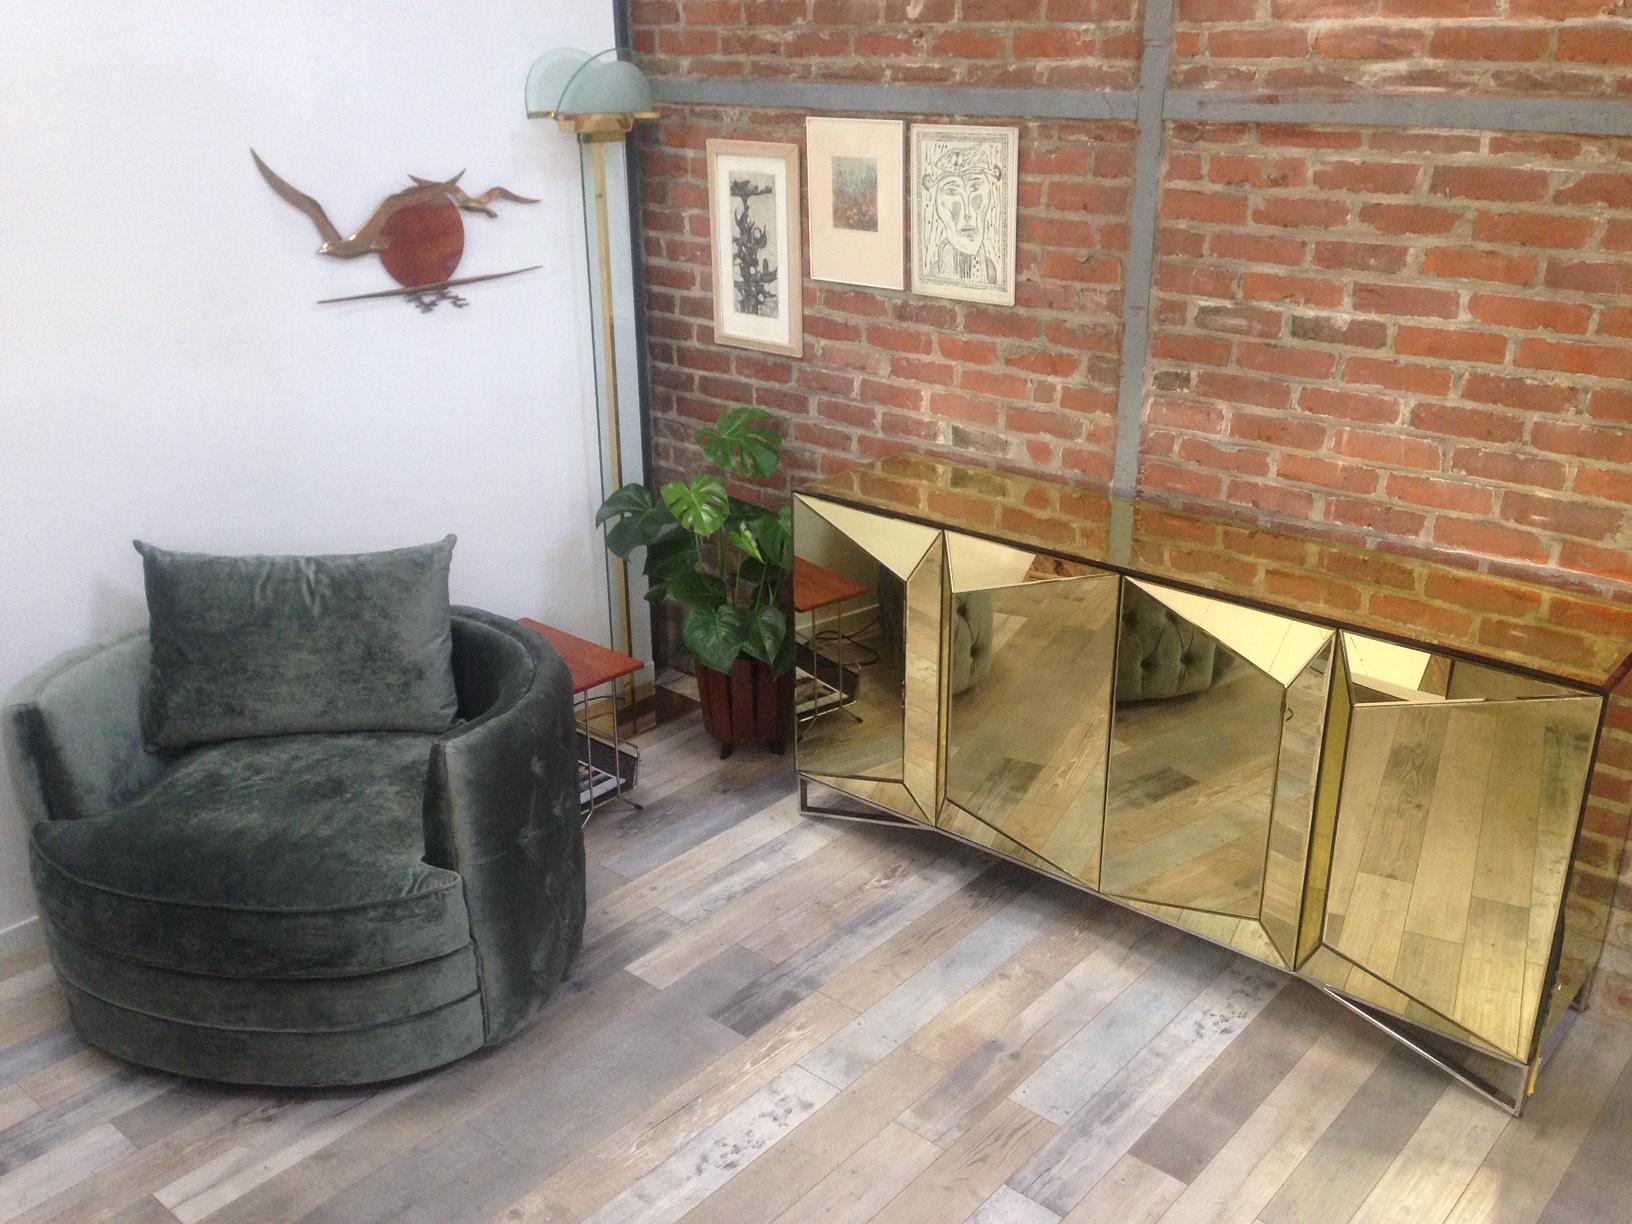 Art Deco Gold Bevelled Mirrored and Chrome Design Sideboard